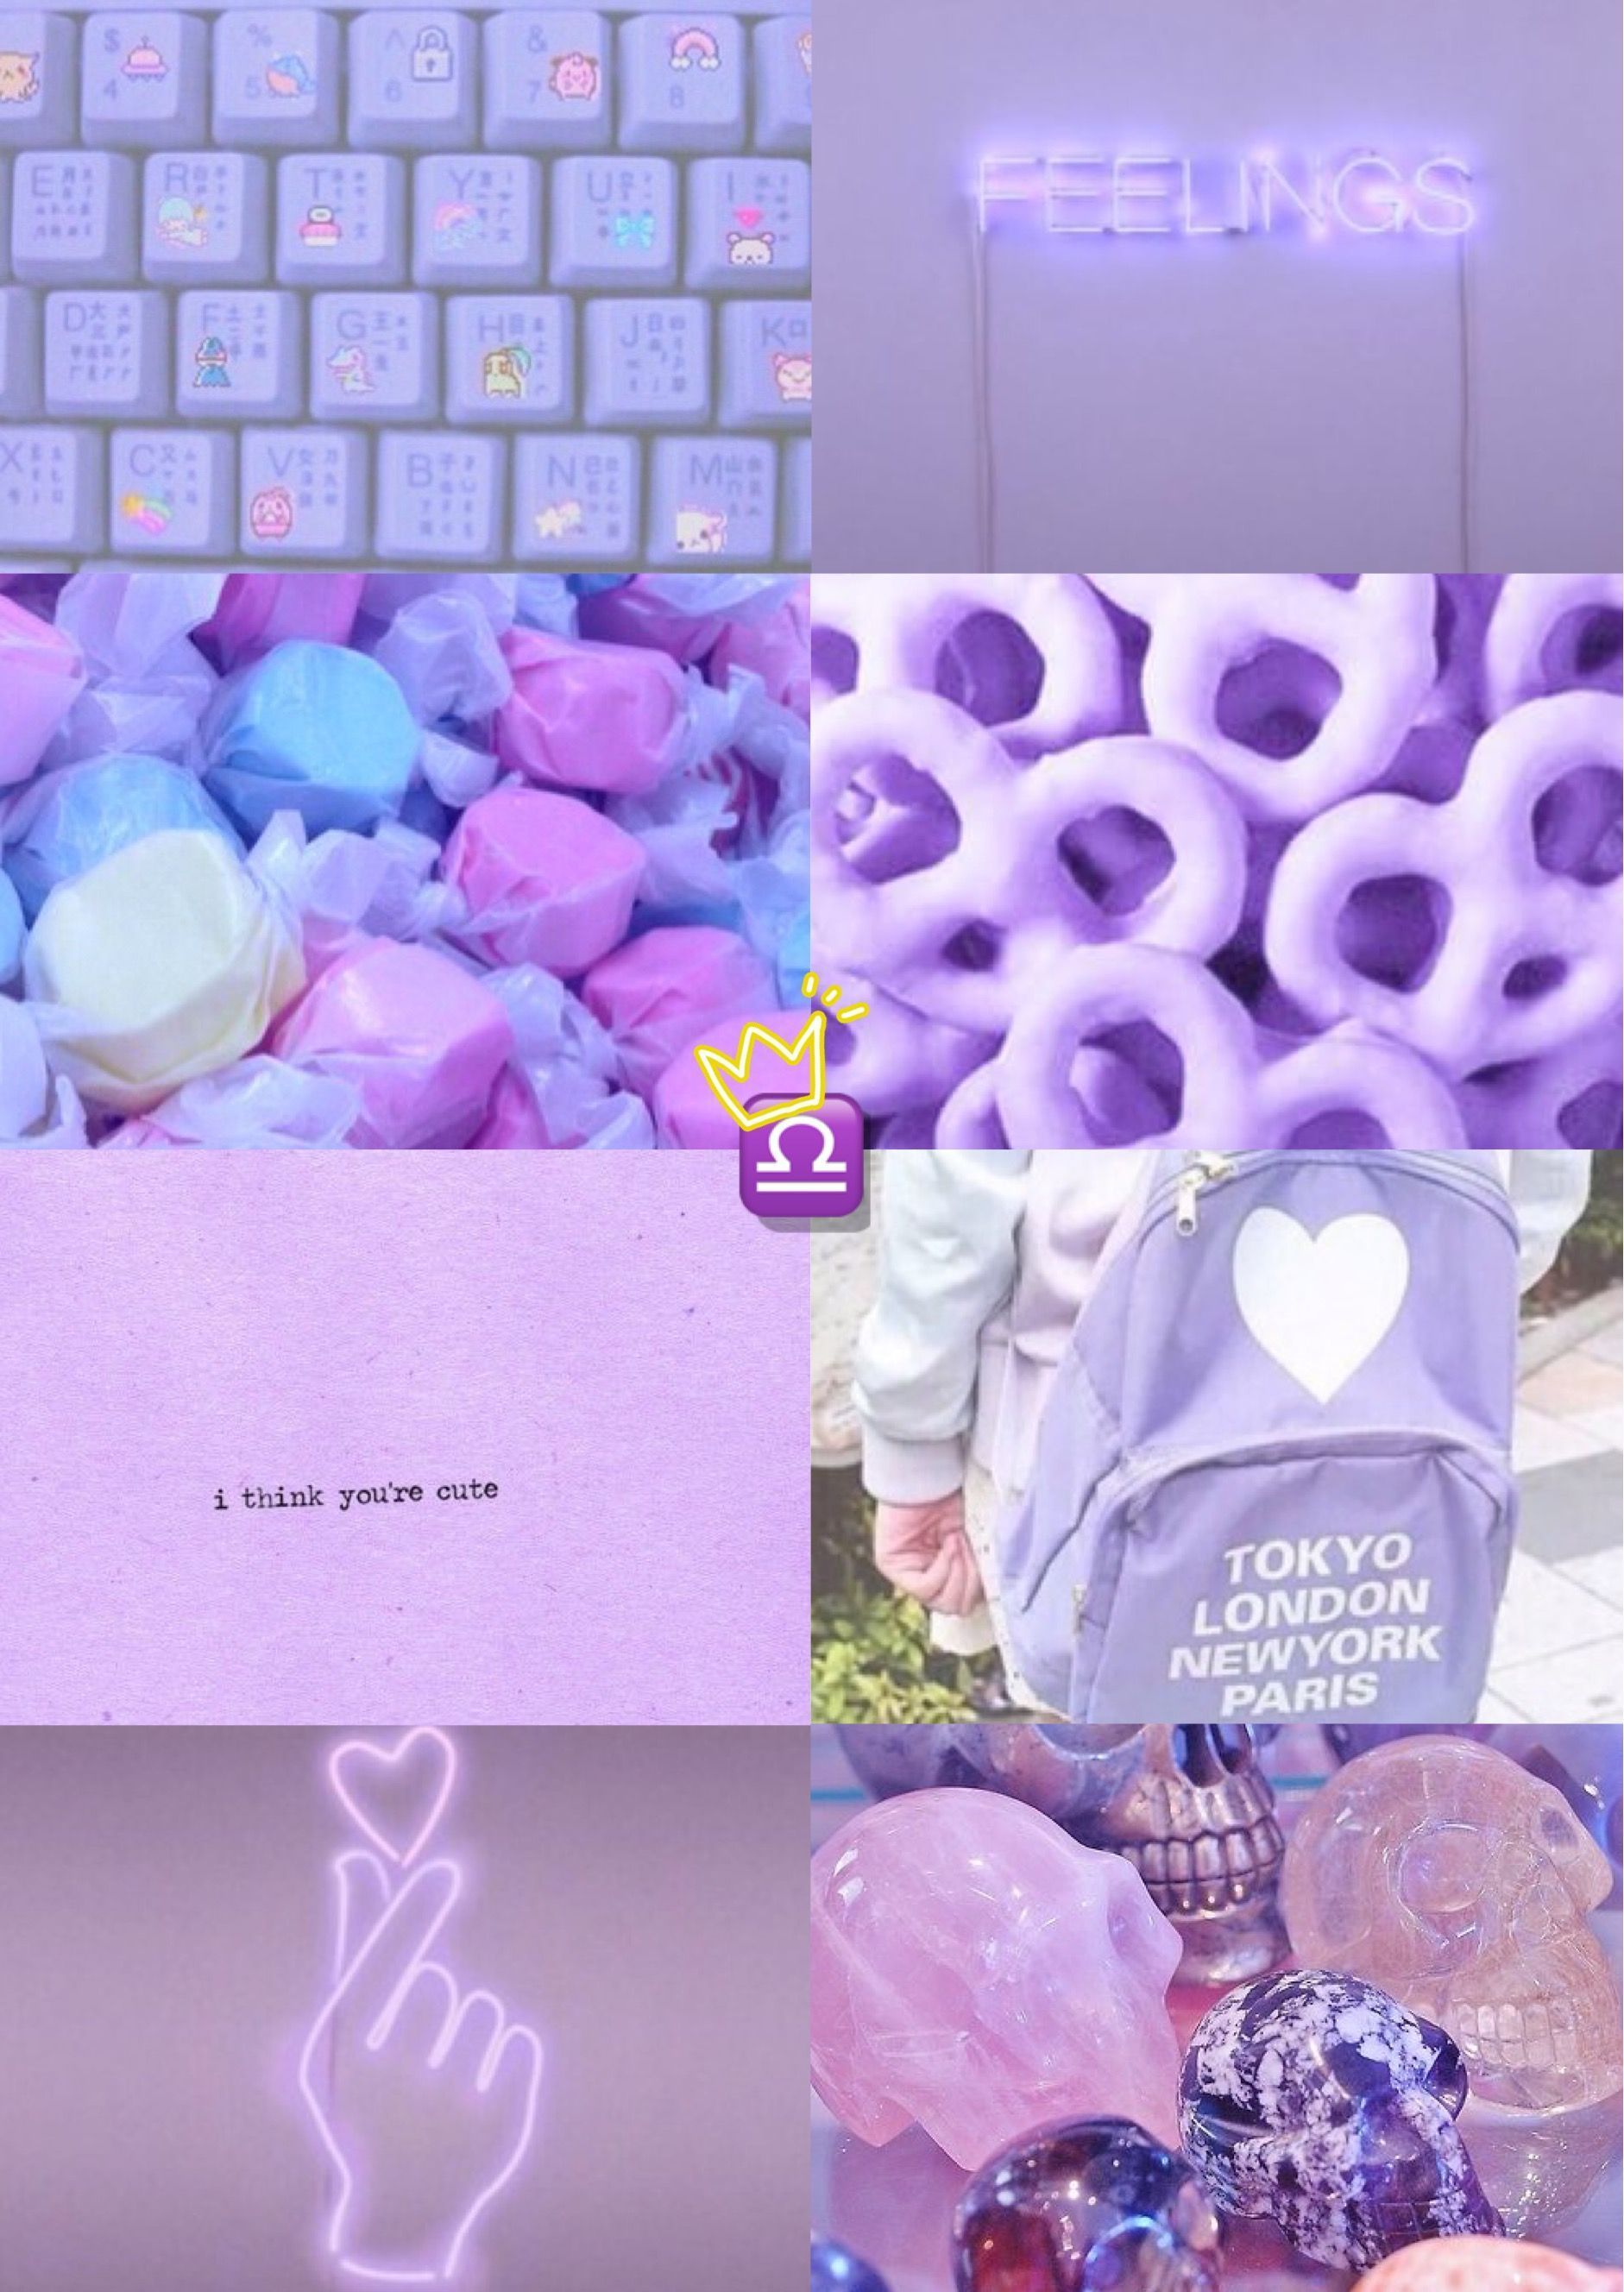 Aesthetic background with purple and blue images - Libra